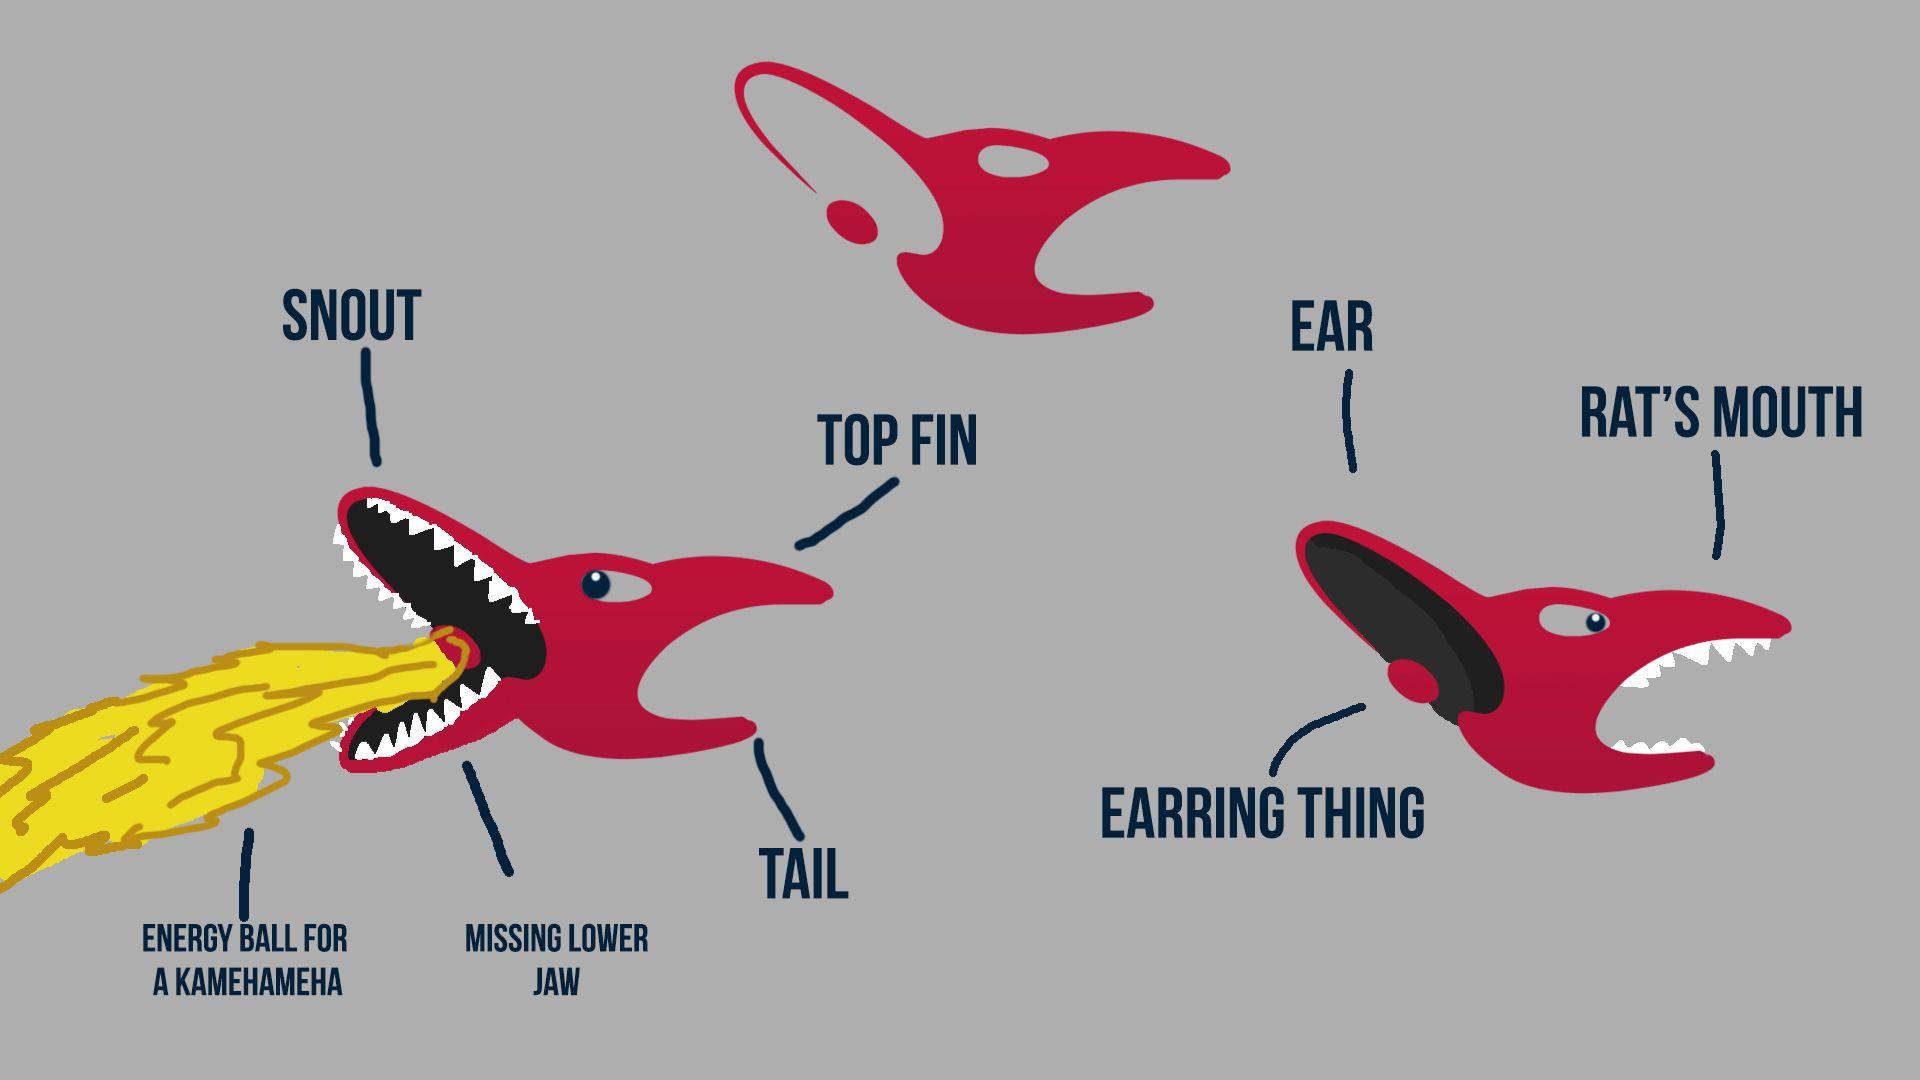 Mousesports Logo - After all this time, I finally realized the Mousesports logo is in ...